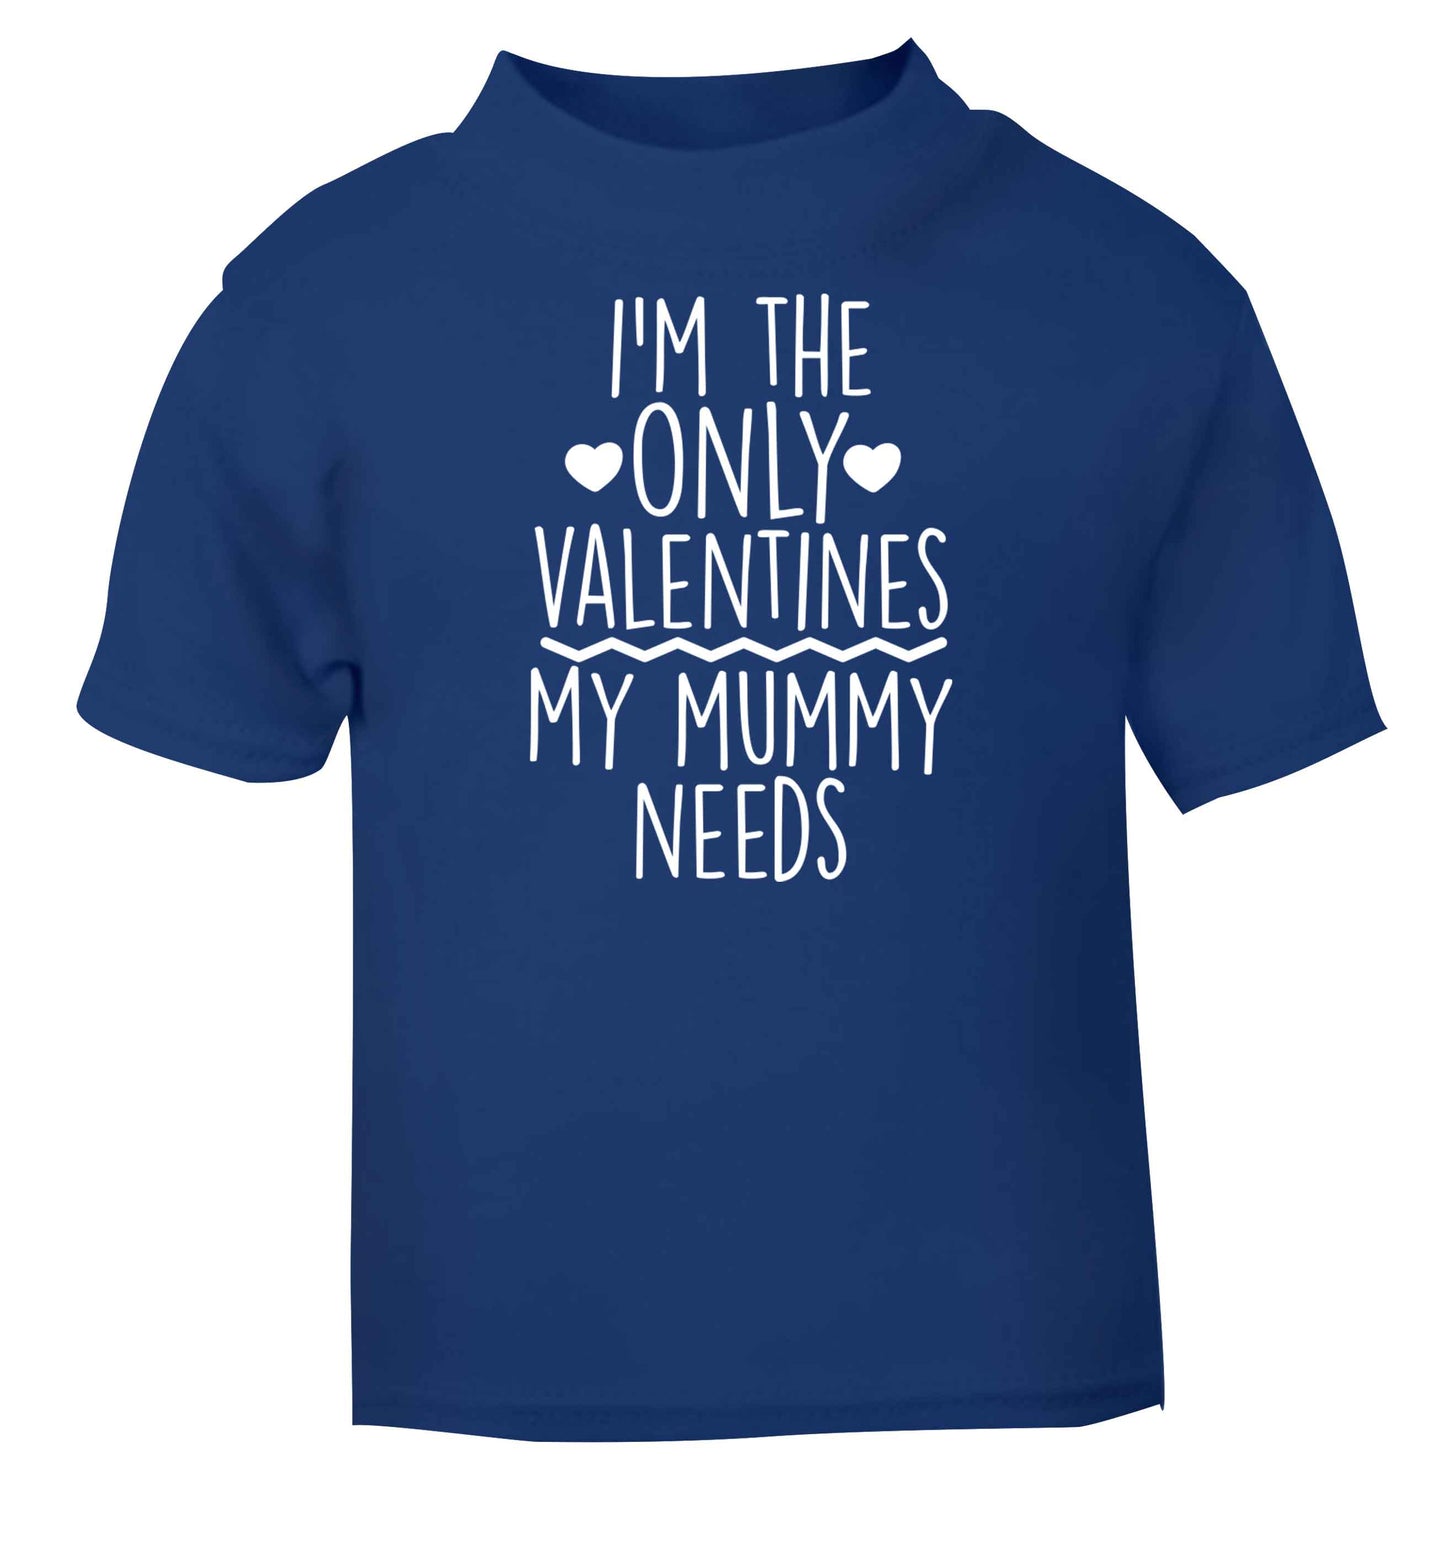 I'm the only valentines my mummy needs blue baby toddler Tshirt 2 Years